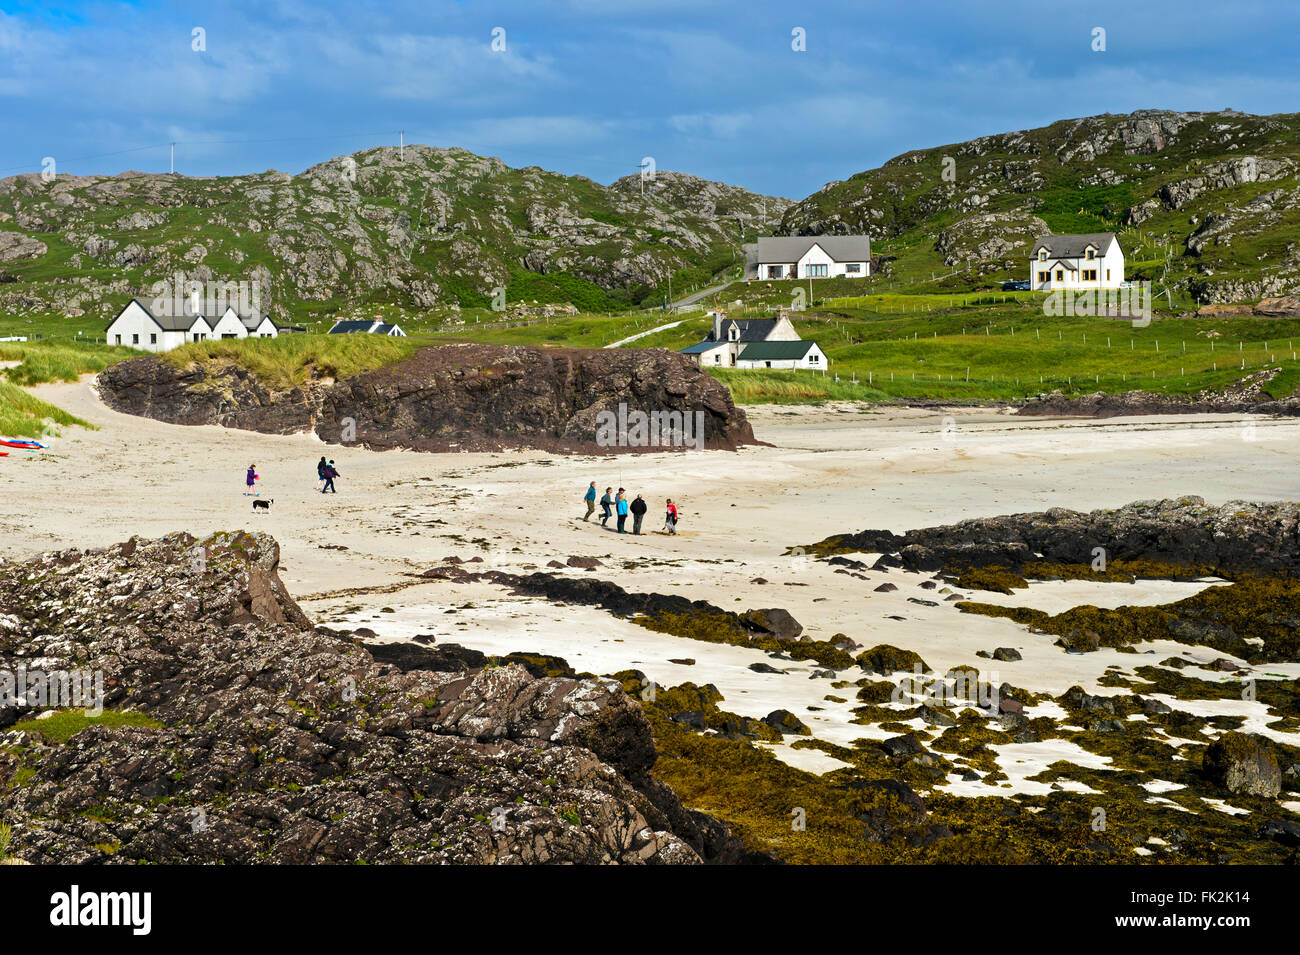 Coastal fishing and crofting village Clatchtoll at the sandy Clachtoll Bay, Clatchtoll, Assynt, Scotland, United Kingdom Stock Photo